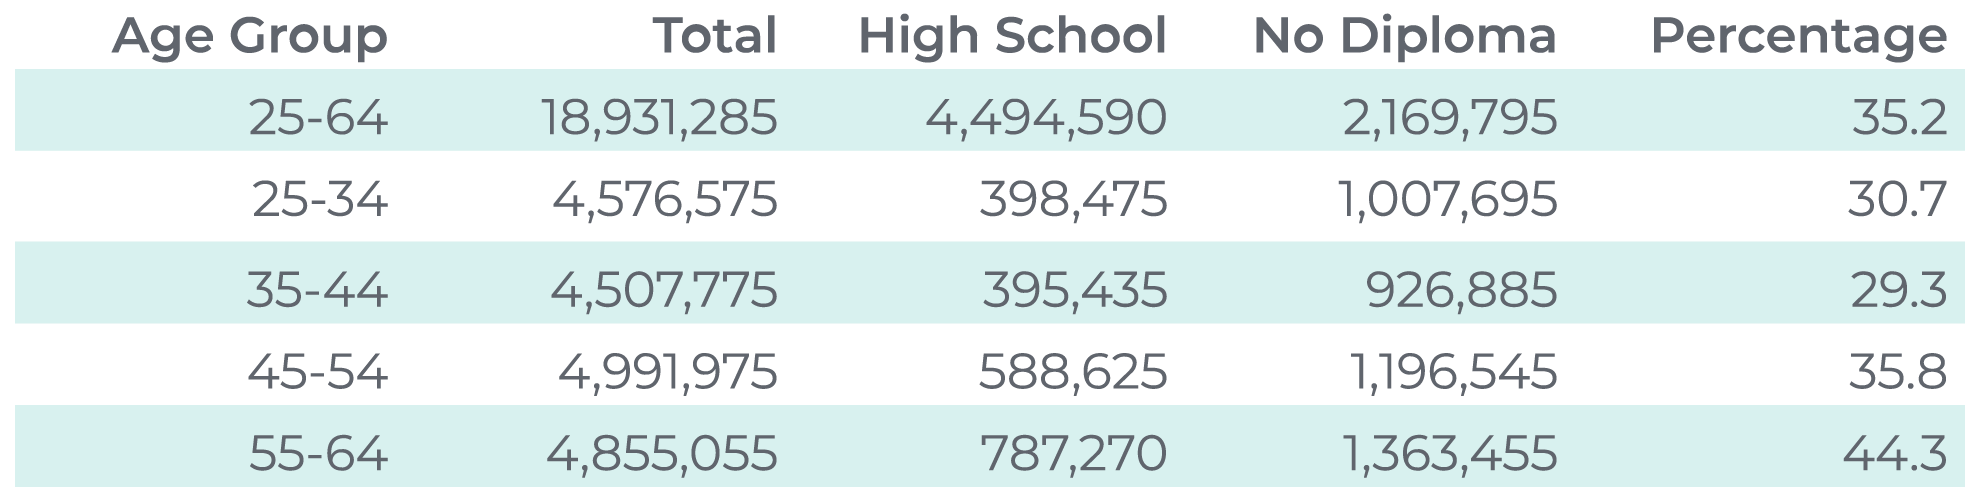 Table 2. Highest Level of Educational Attainment (Both Sexes, Aged 25 to 64), 2016